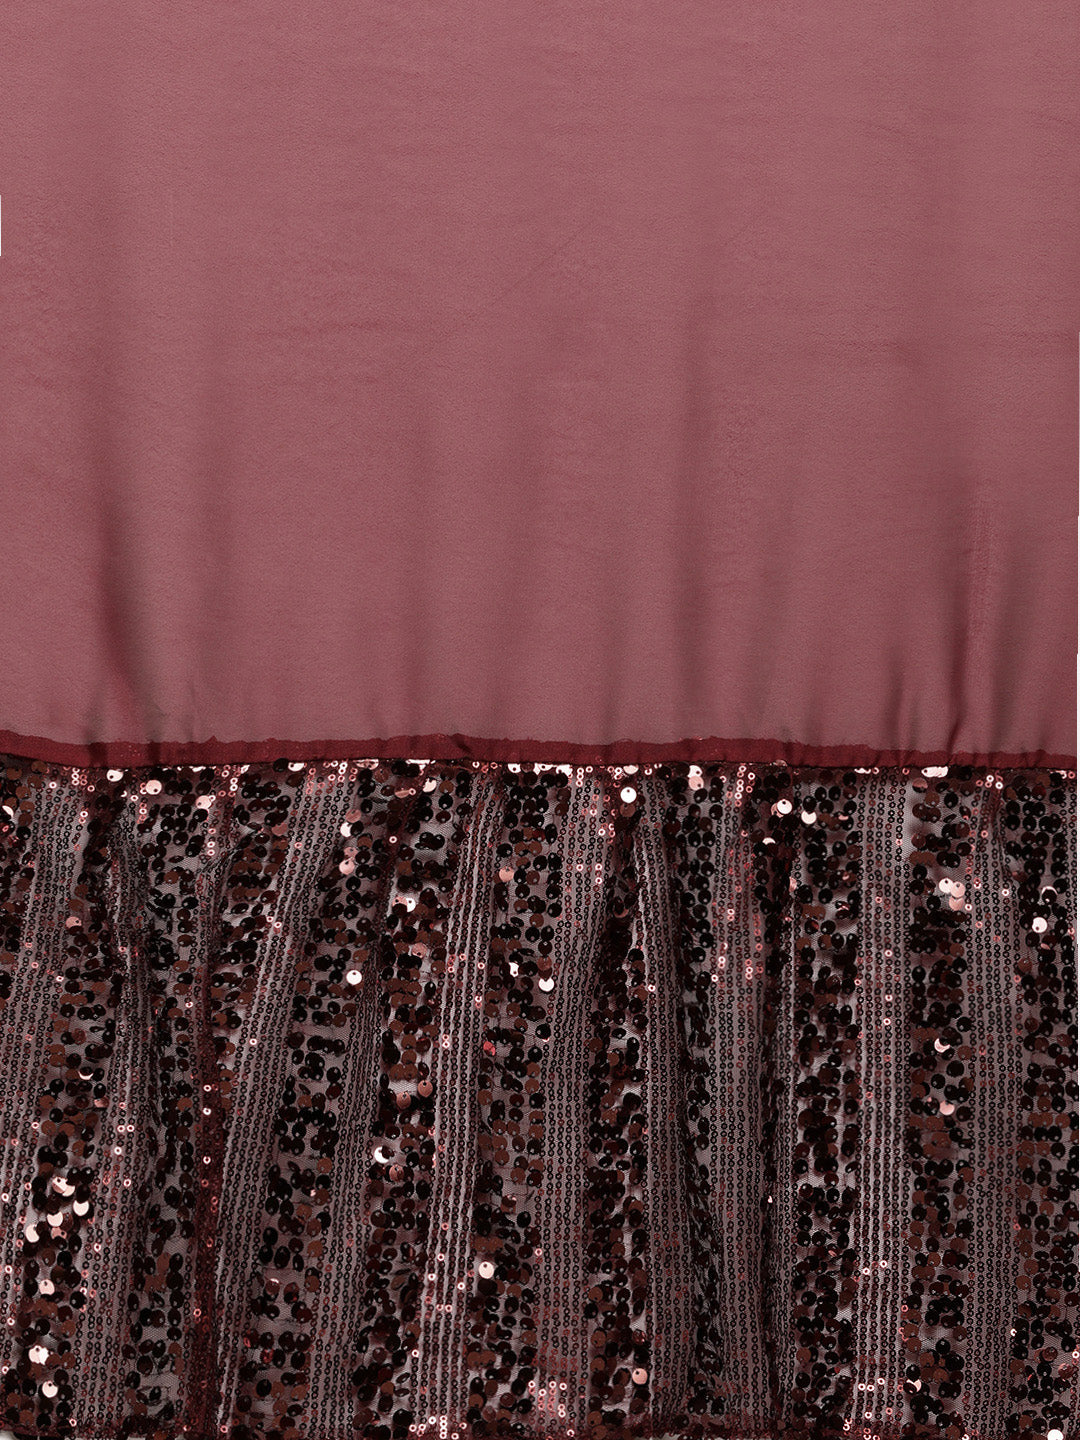 Polyester Sequence Maroon Saree